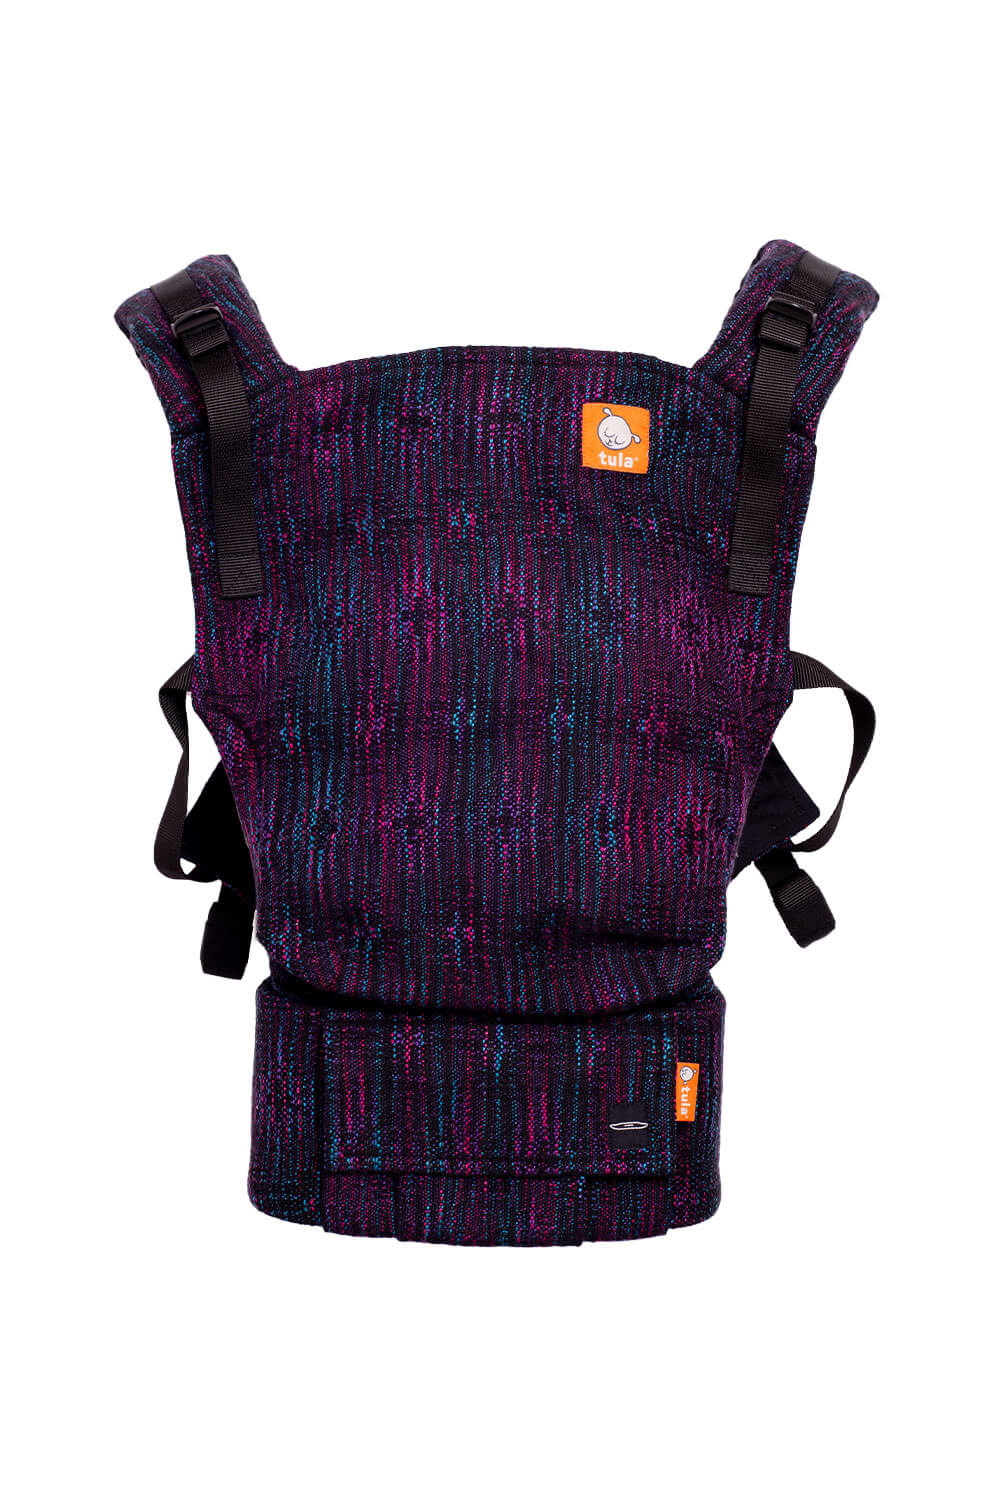 Pluto - Signature Handwoven Free-to-Grow Baby Carrier